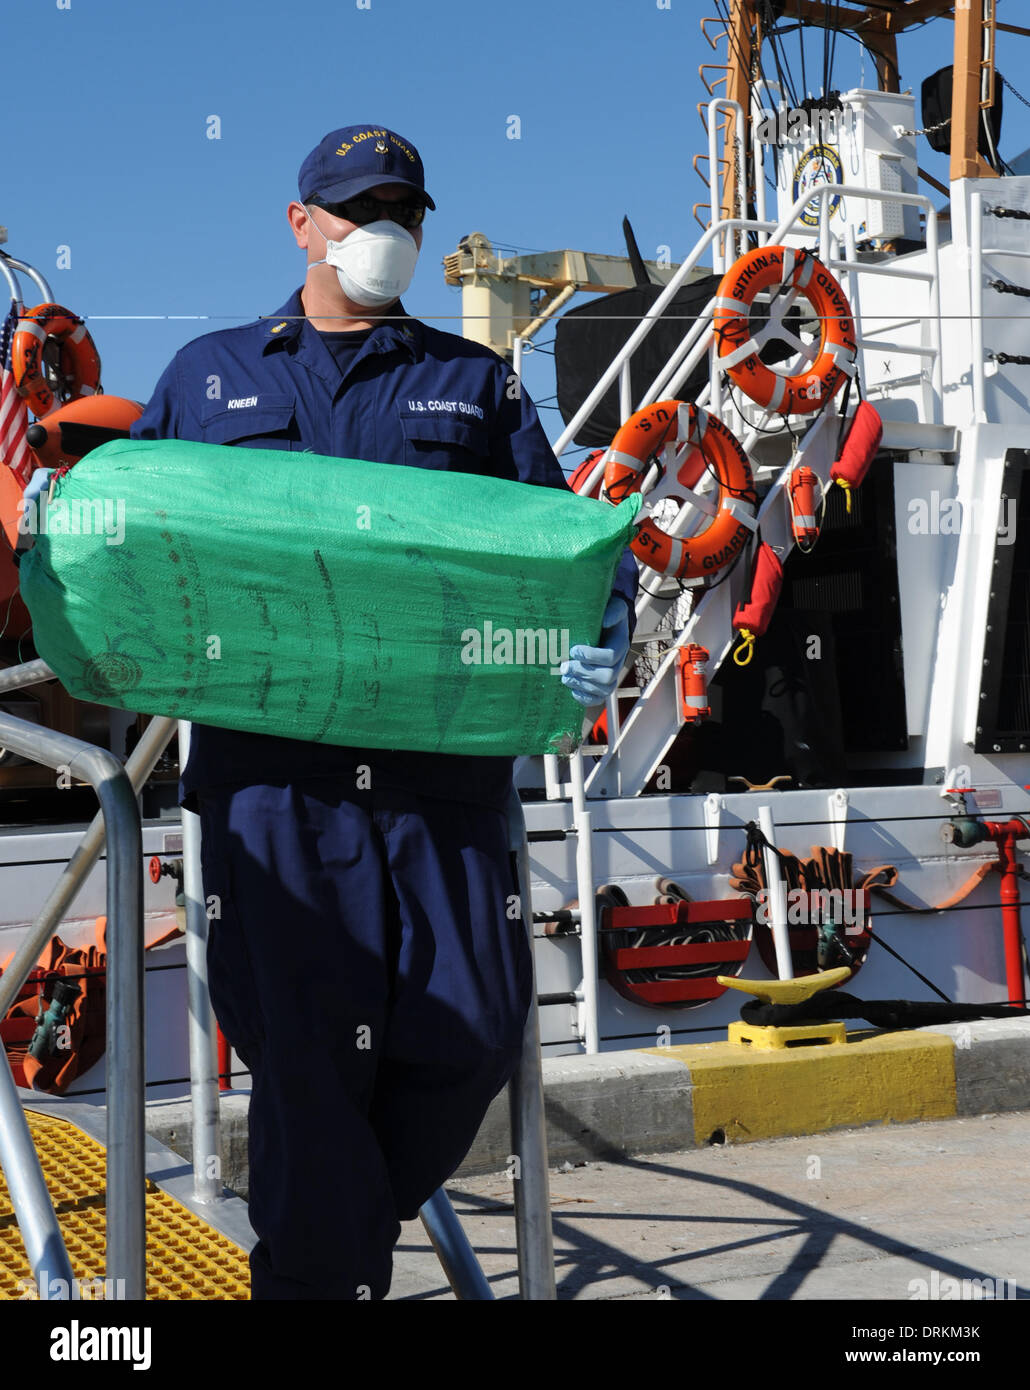 US Coast Guard Chief Petty Officer Raymond Kneen offloads 2,500 pounds of cocaine worth an estimated $37 million wholesale value January 28, 2014 in Miami Beach, FL. The contraband was seized in a multi-national counter-drug operation south of the Dominican Republic. Stock Photo